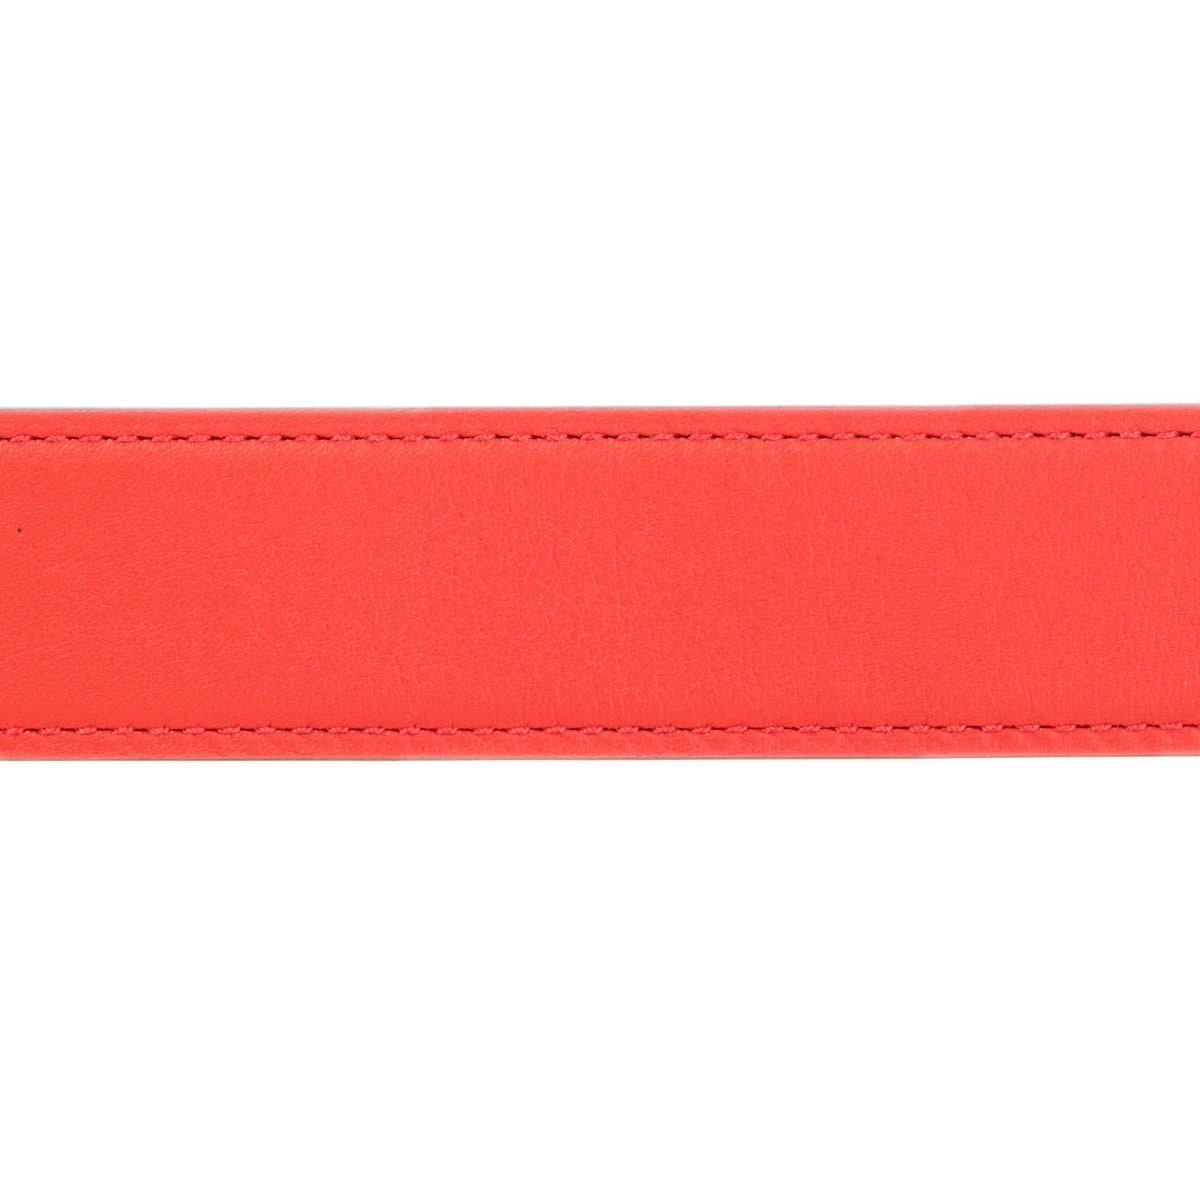 100% auth Hermes 32mm reversible belt strap in Vermillon (red) Veau Swift and Rose Jaipur (coral) Veau Epsom leather. Brand new. Comes with box.

Measurements
Tag Size	100
Width	3.2cm (1.2in)
Fits	98cm (38.2in) to 103cm (40.2in)

All our listings